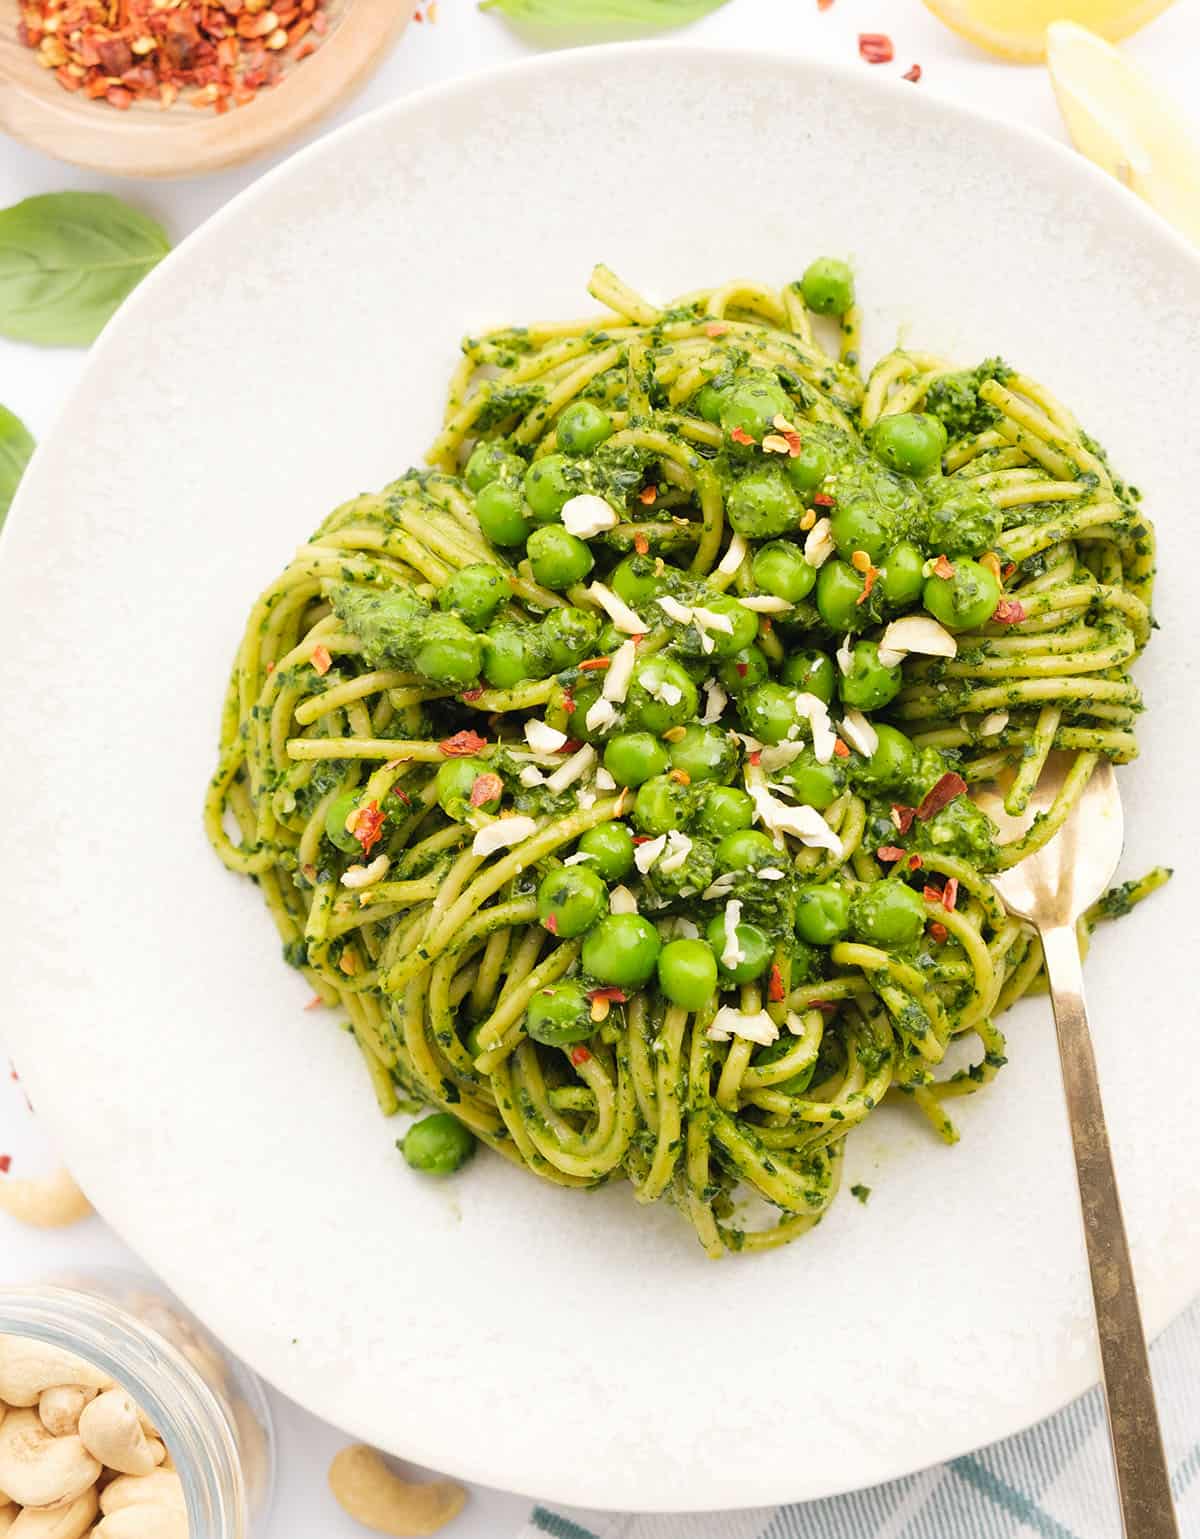 Top view of a white plate full of healthy spaghetti with a green pesto and peas.